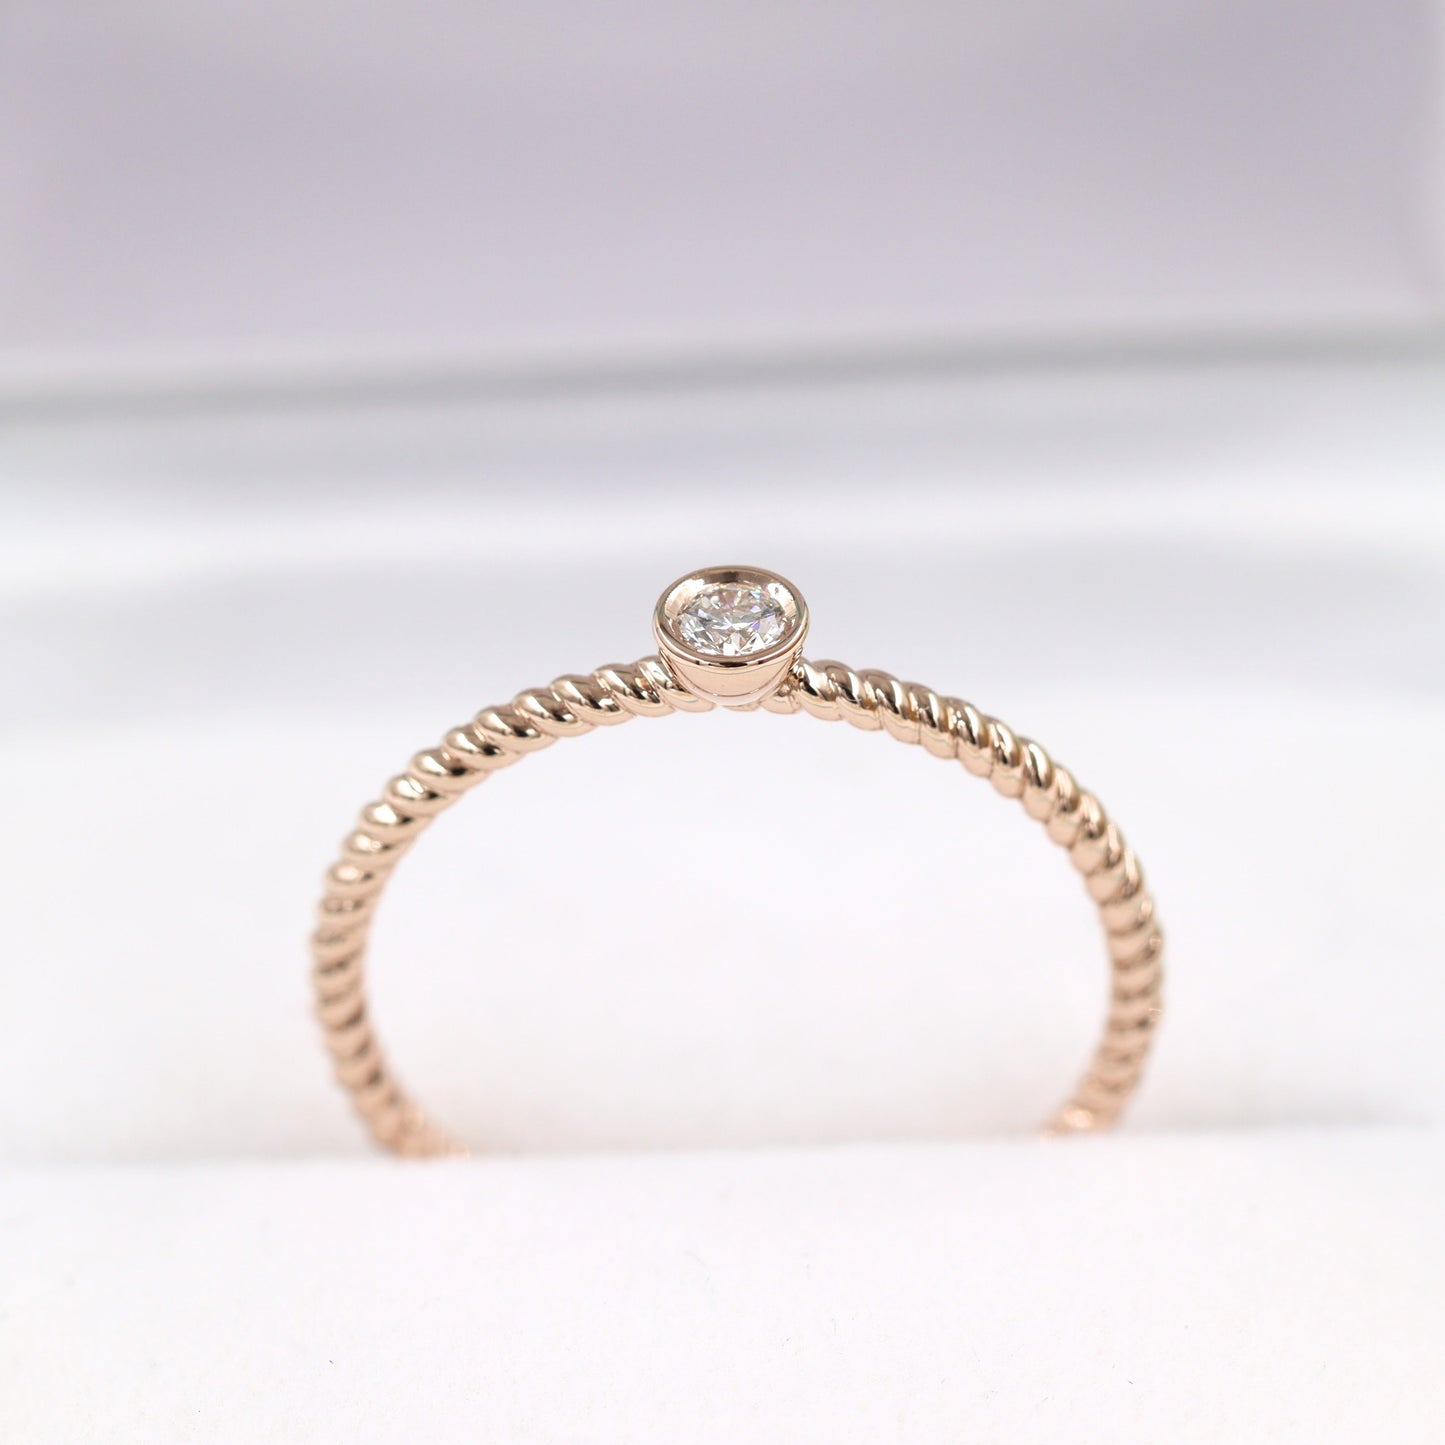 Single .05ct Diamond Wedding Ring/14K Gold Natural Diamond Ring/Simple Engagement Ring / Stackable Round Bezel Band/Twist Dainty Ring/Gift for her